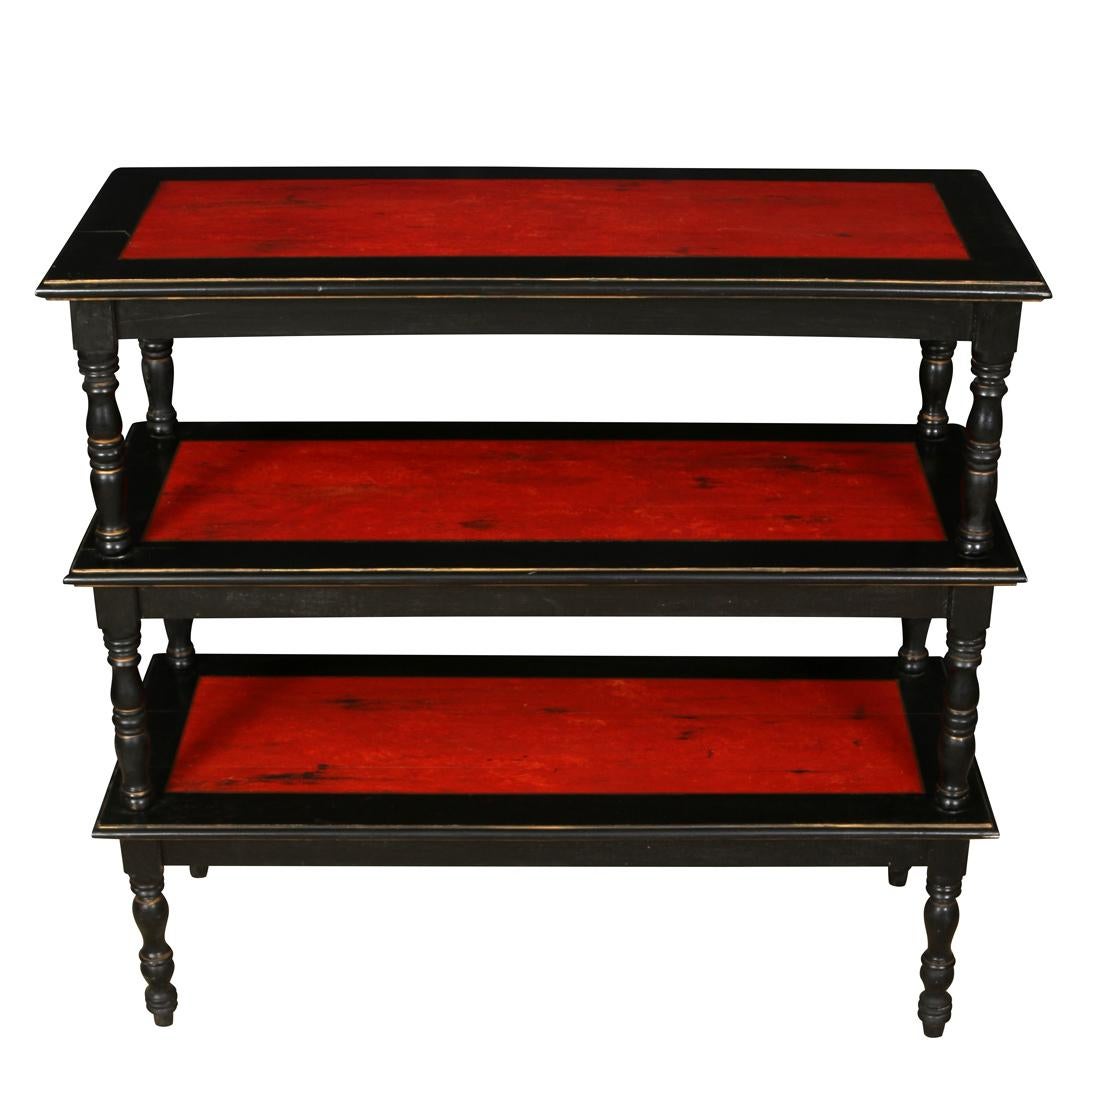 A pair of vintage three tiered etageres painted black with distressed red shelves and turned legs.